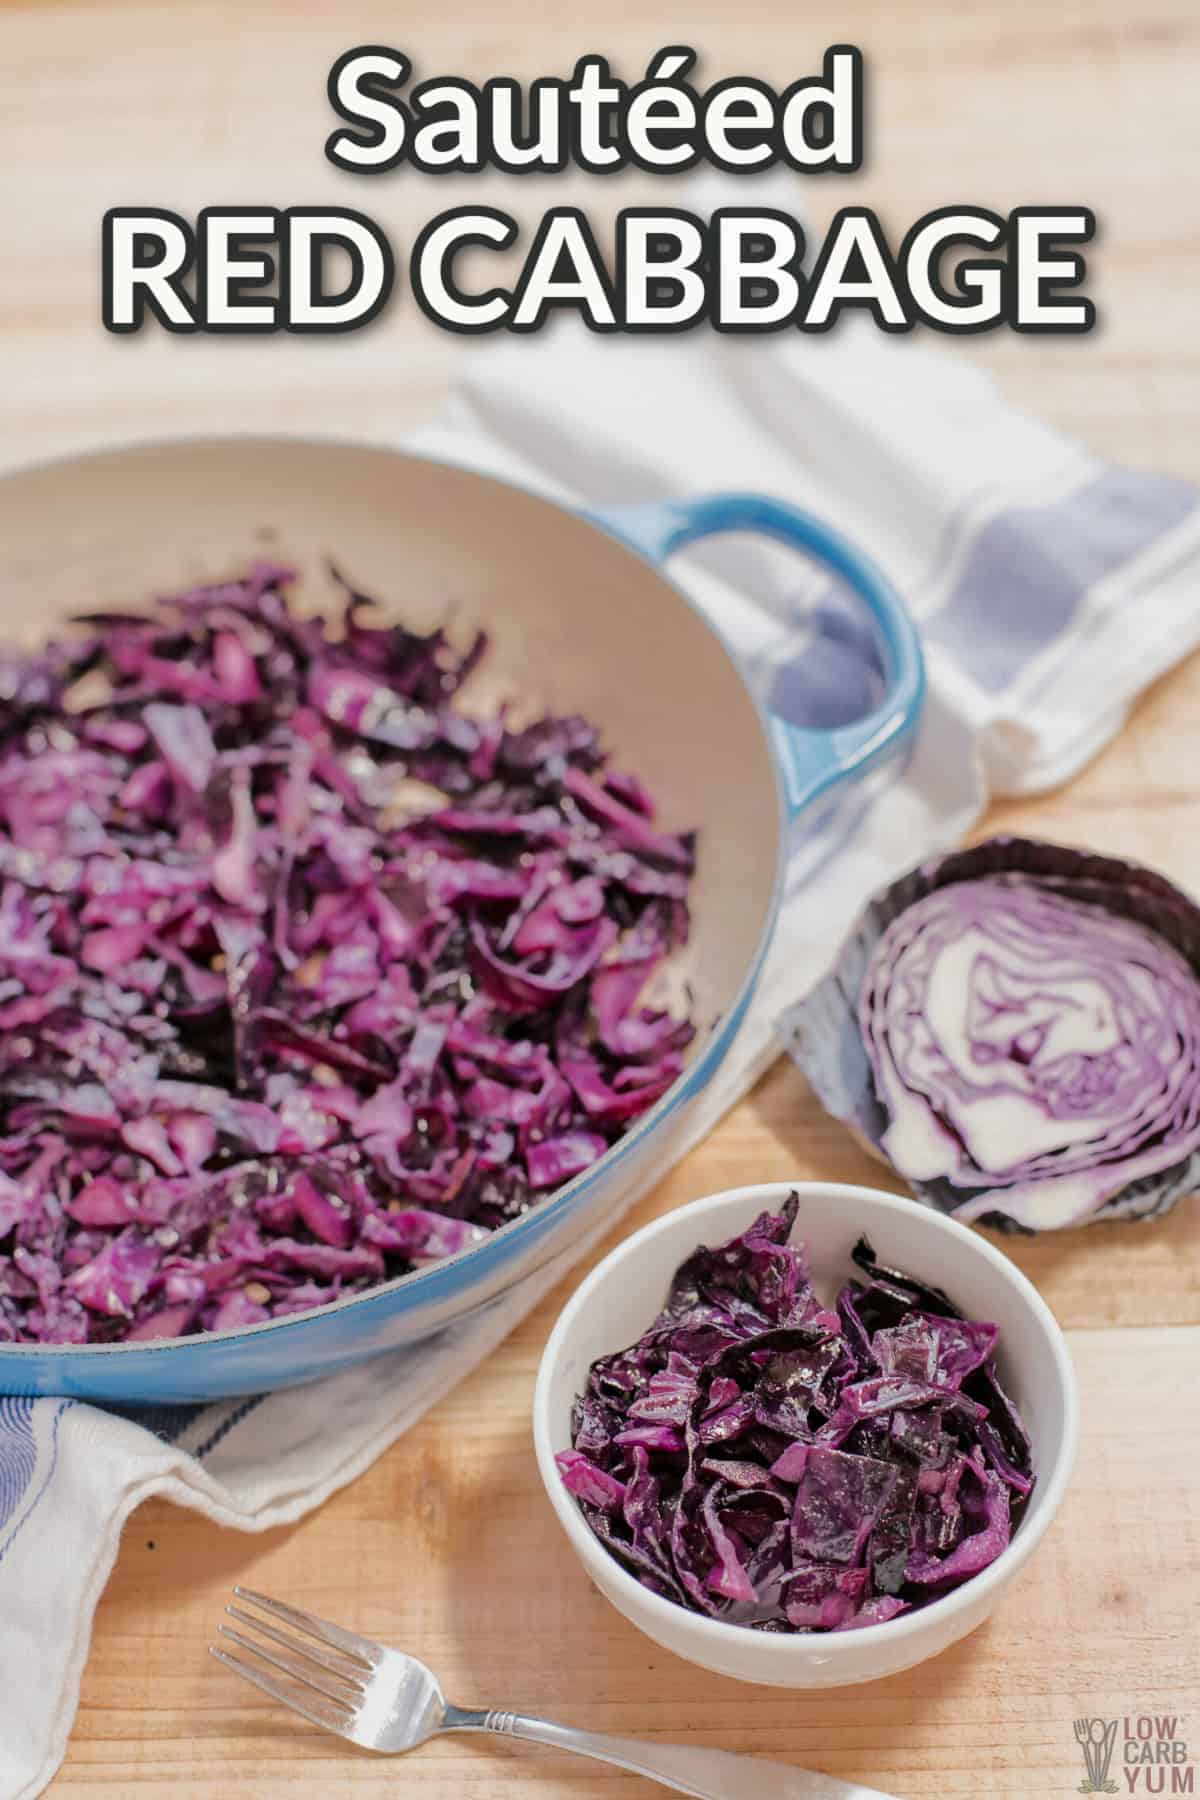 sautéed red cabbage with text overlay.